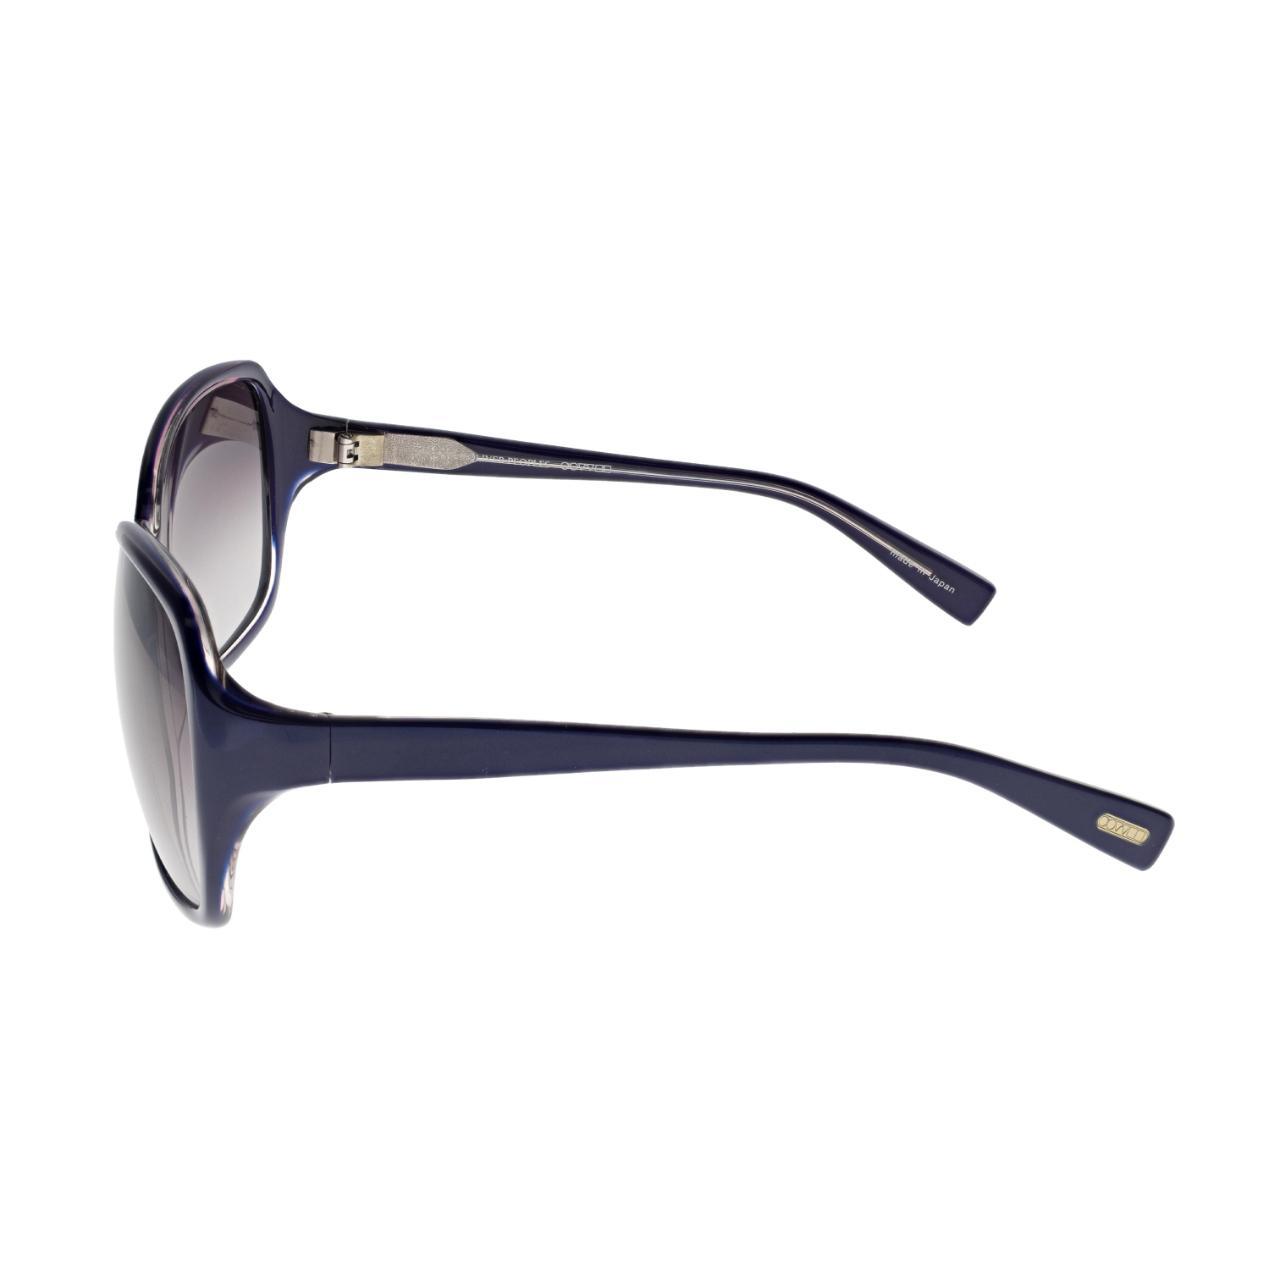 Oliver Peoples Women's Blue and Grey Sunglasses (3)